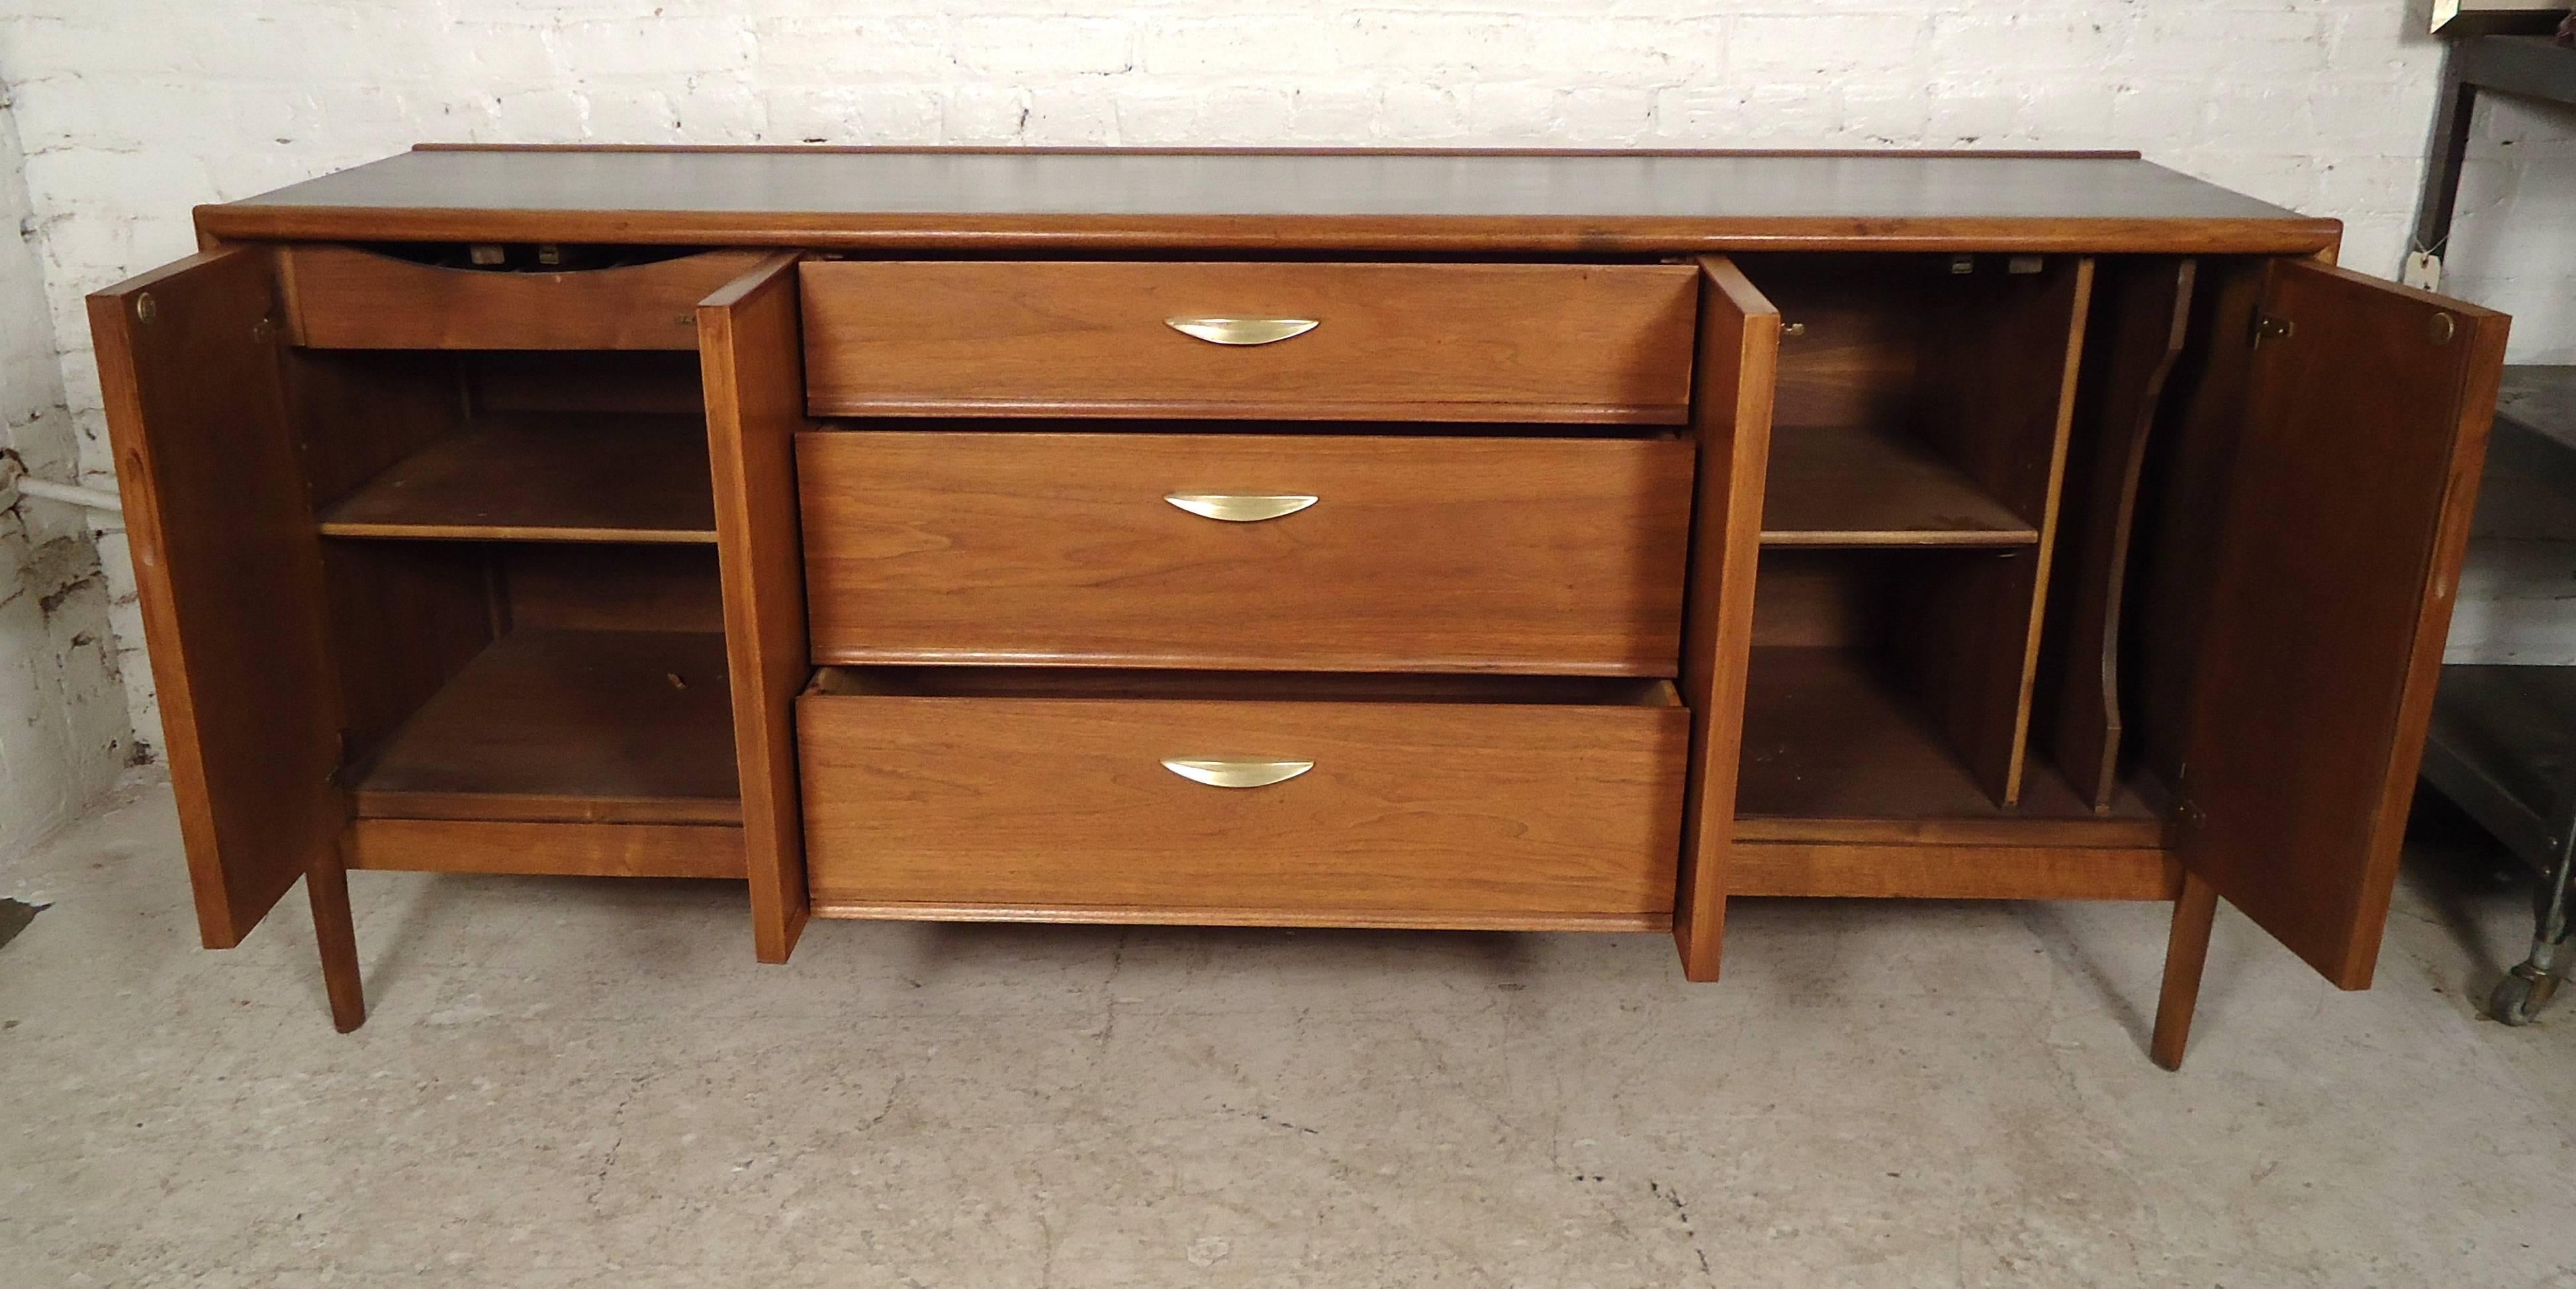 Very stunning vintage modern credenza features two-door storage cabinets on each side, three drawers with brass handles, on a set of four sturdy legs.

Please confirm item location (NY or NJ).